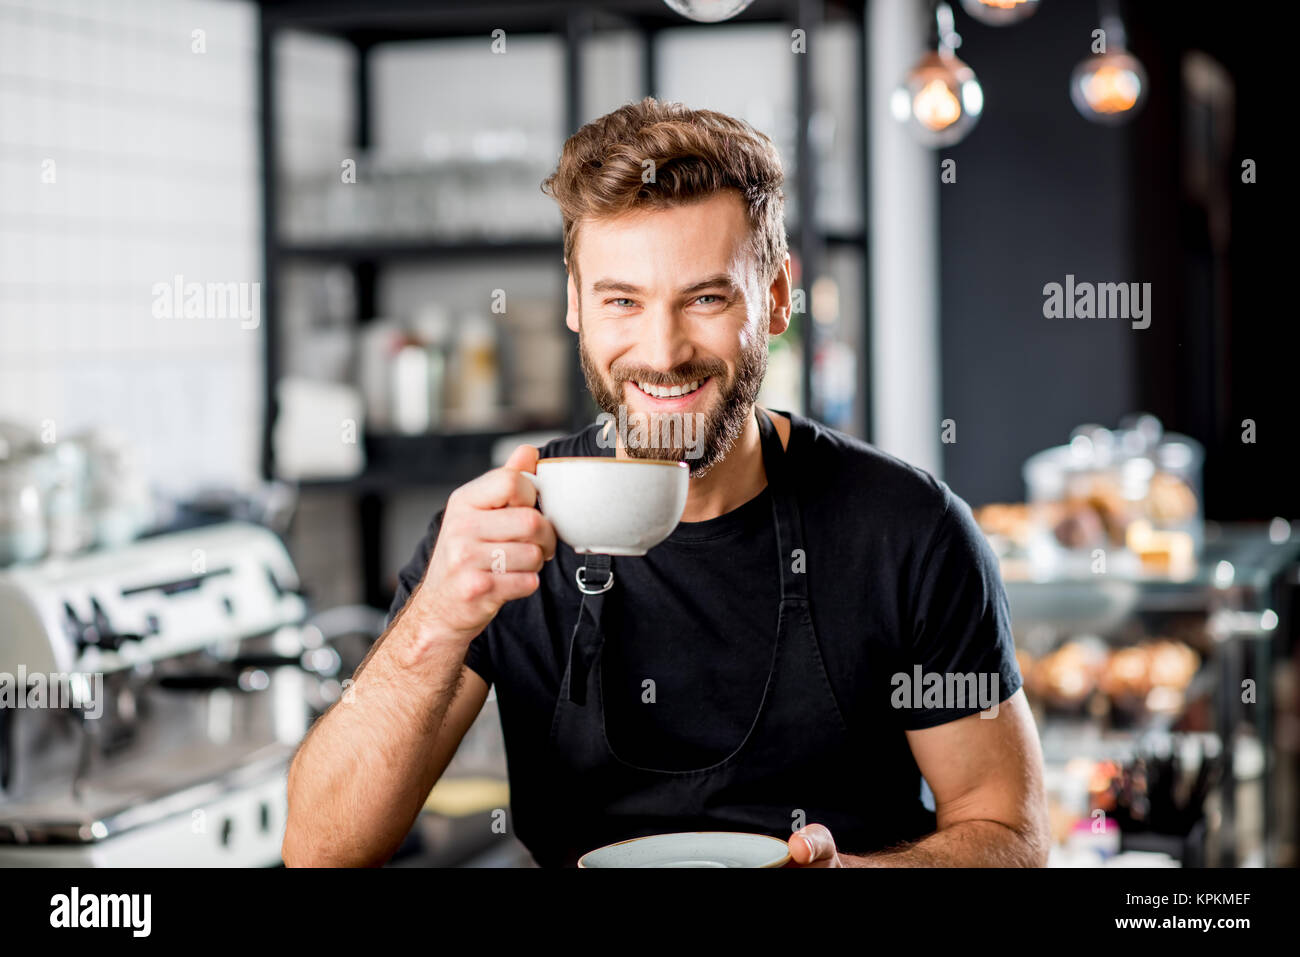 Barista portrait in the cafe Stock Photo